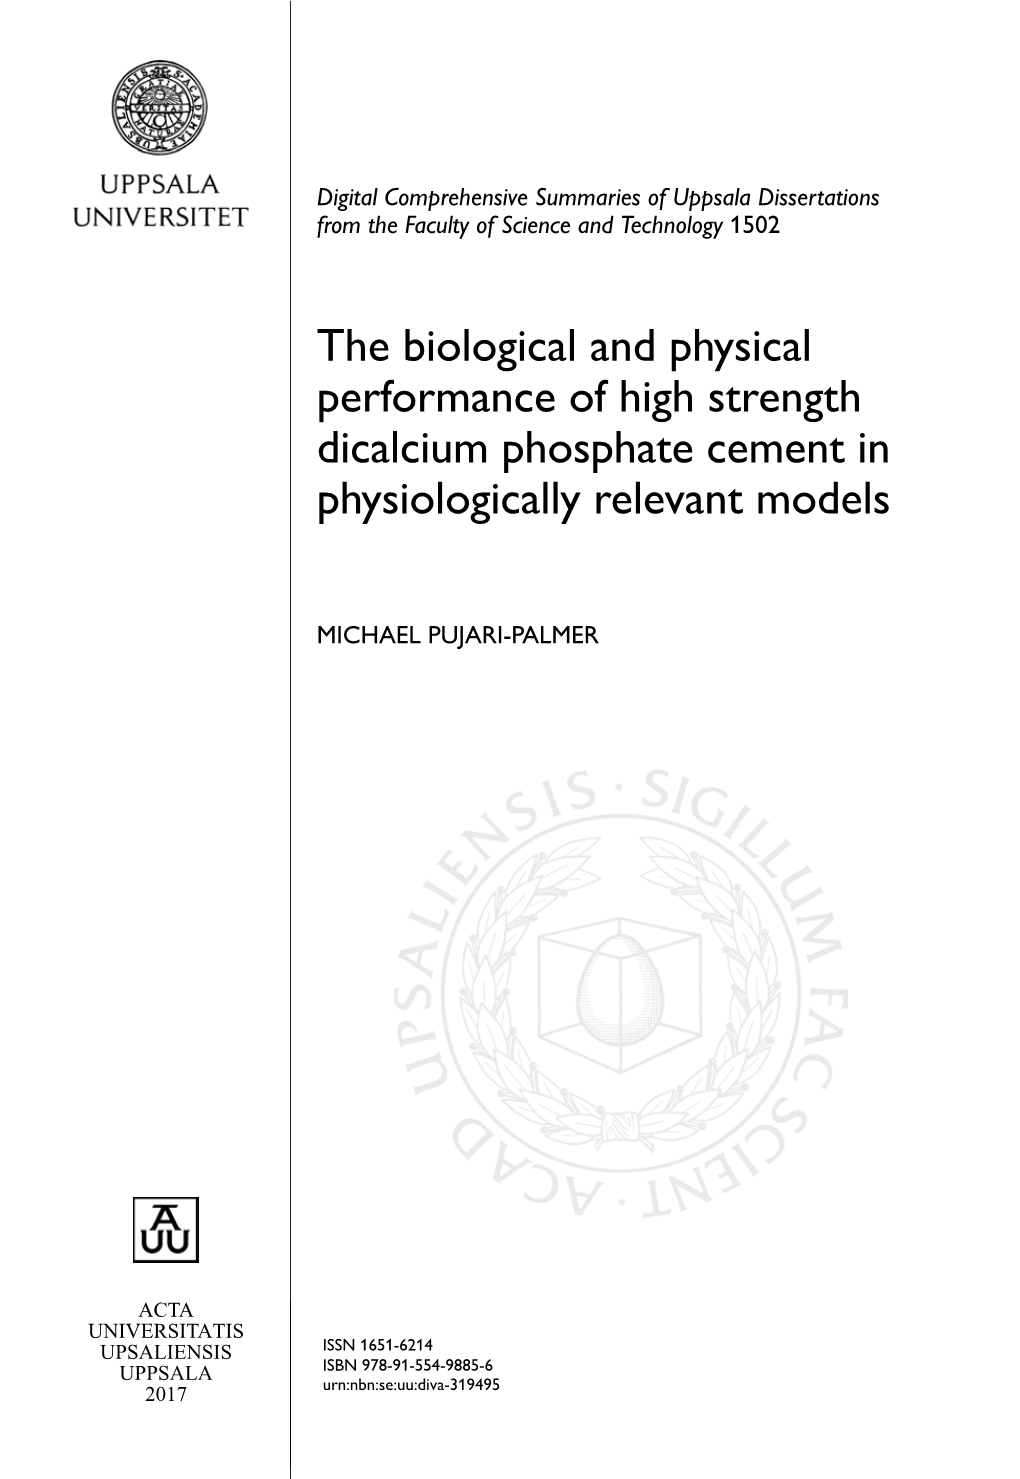 The Biological and Physical Performance of High Strength Dicalcium Phosphate Cement in Physiologically Relevant Models